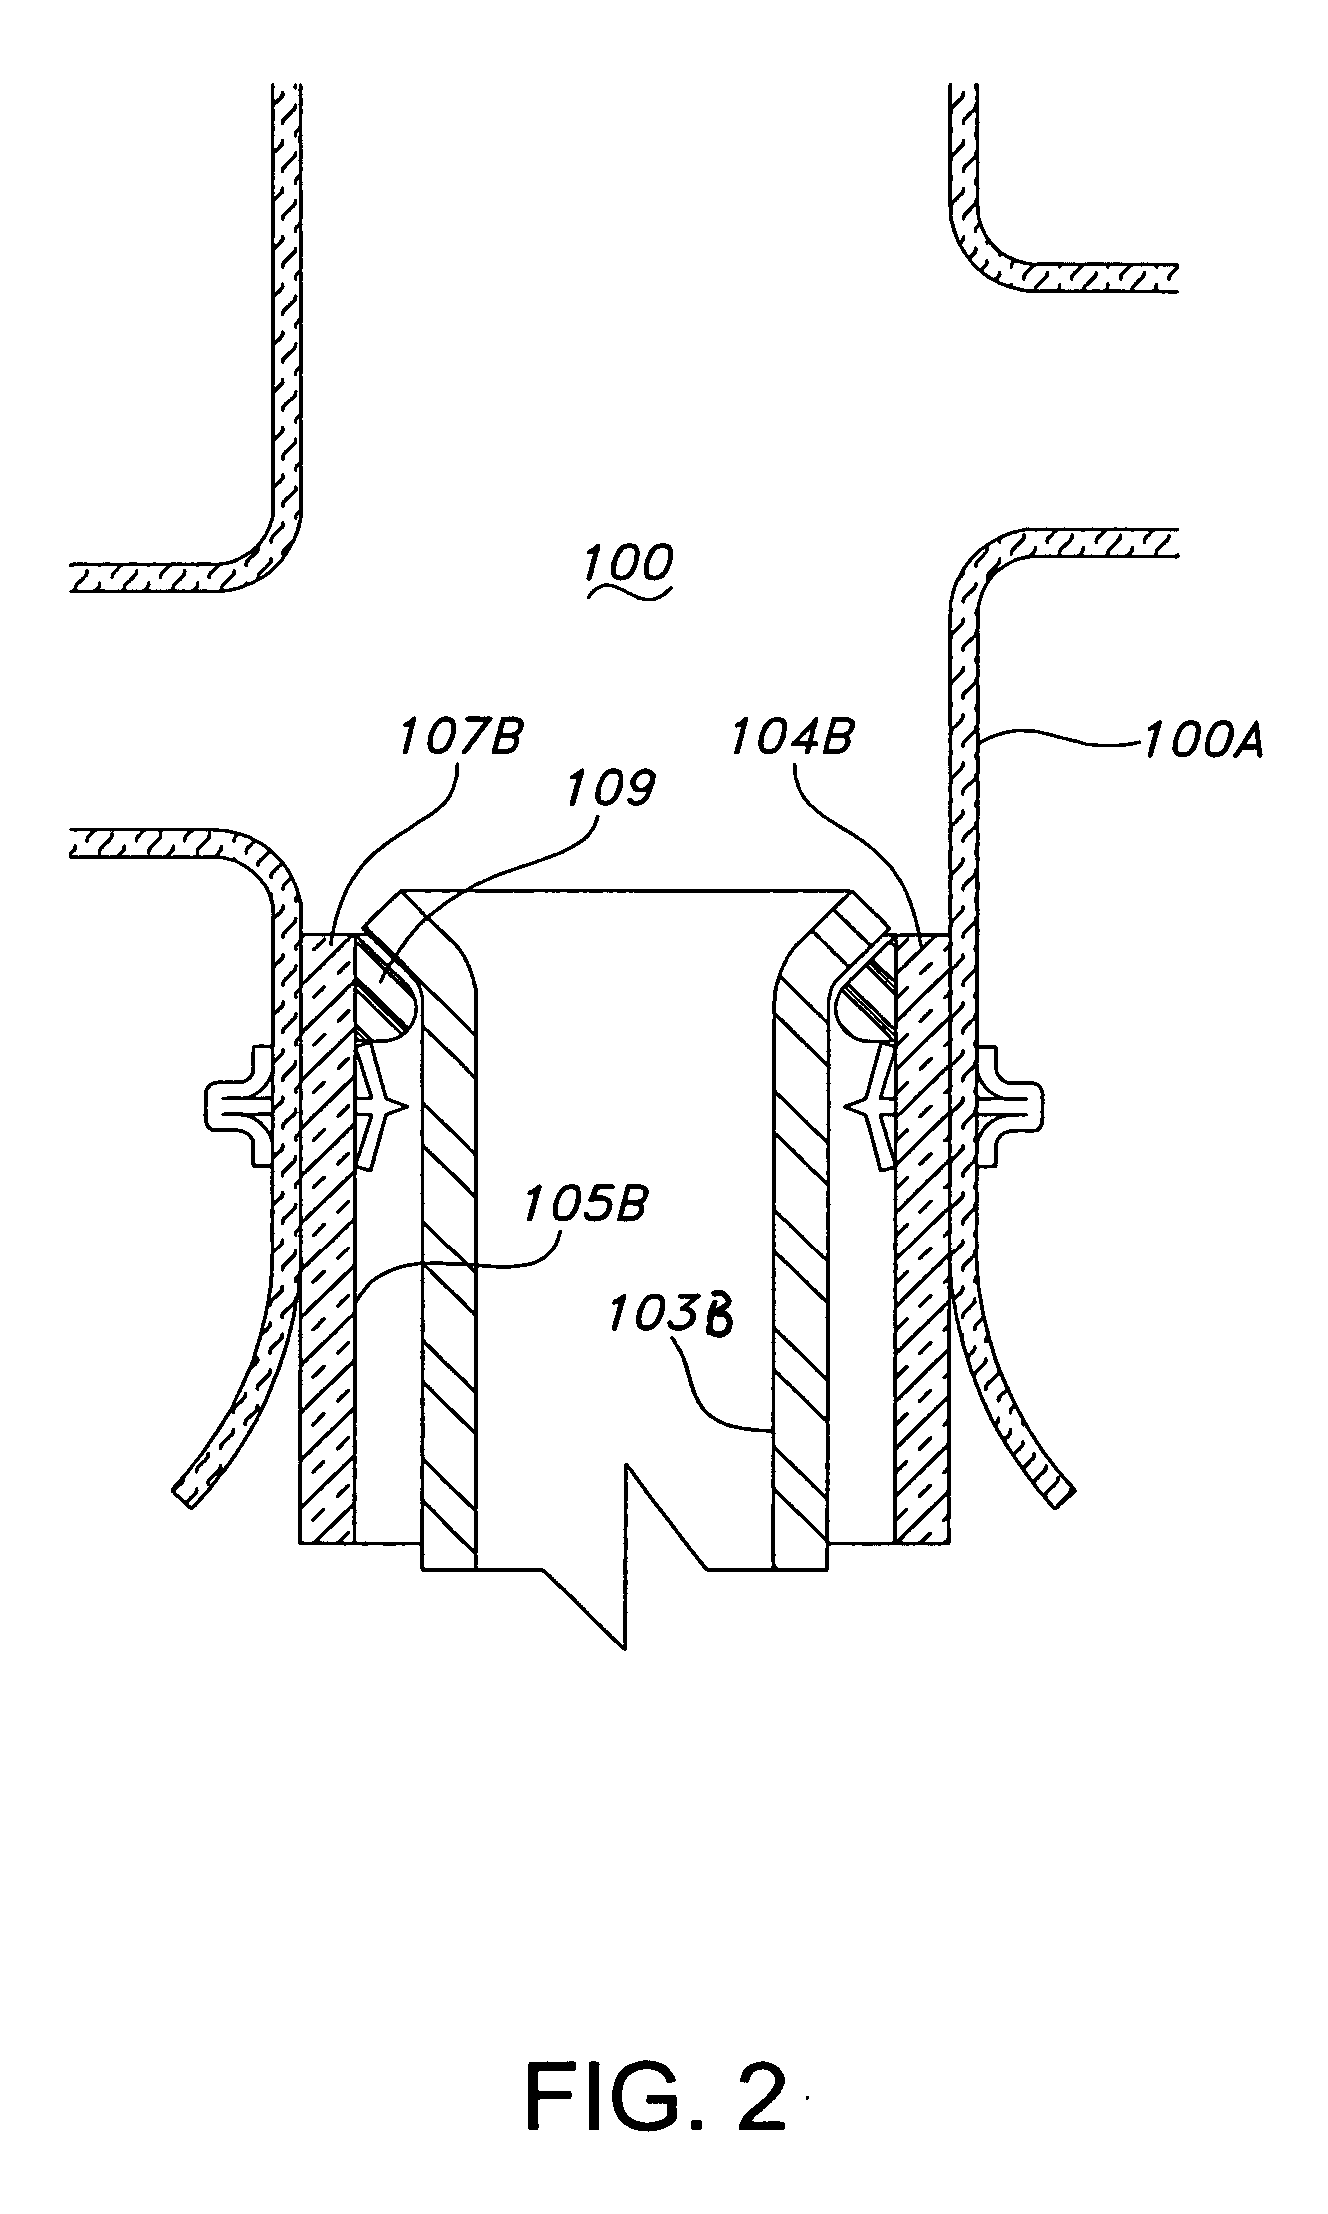 Prosthesis fixation device and method